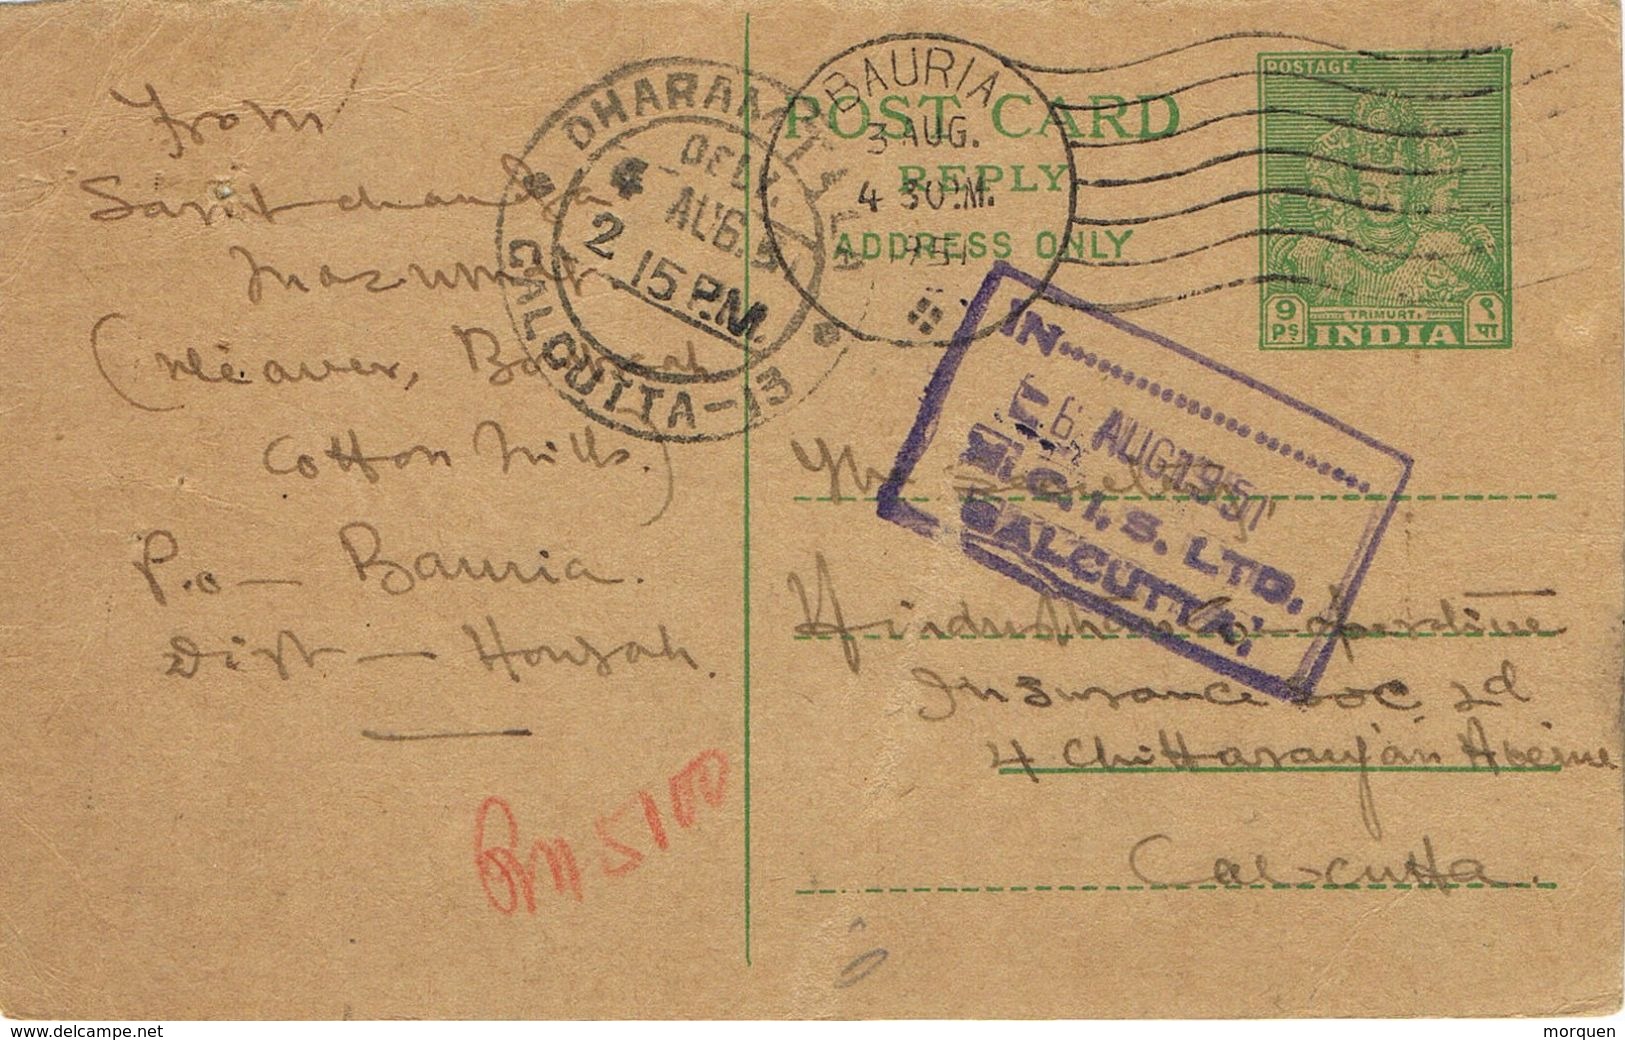 36888. Entero Postal BAURIA (Howrah) India 1951 To Calcutta - Inland Letter Cards